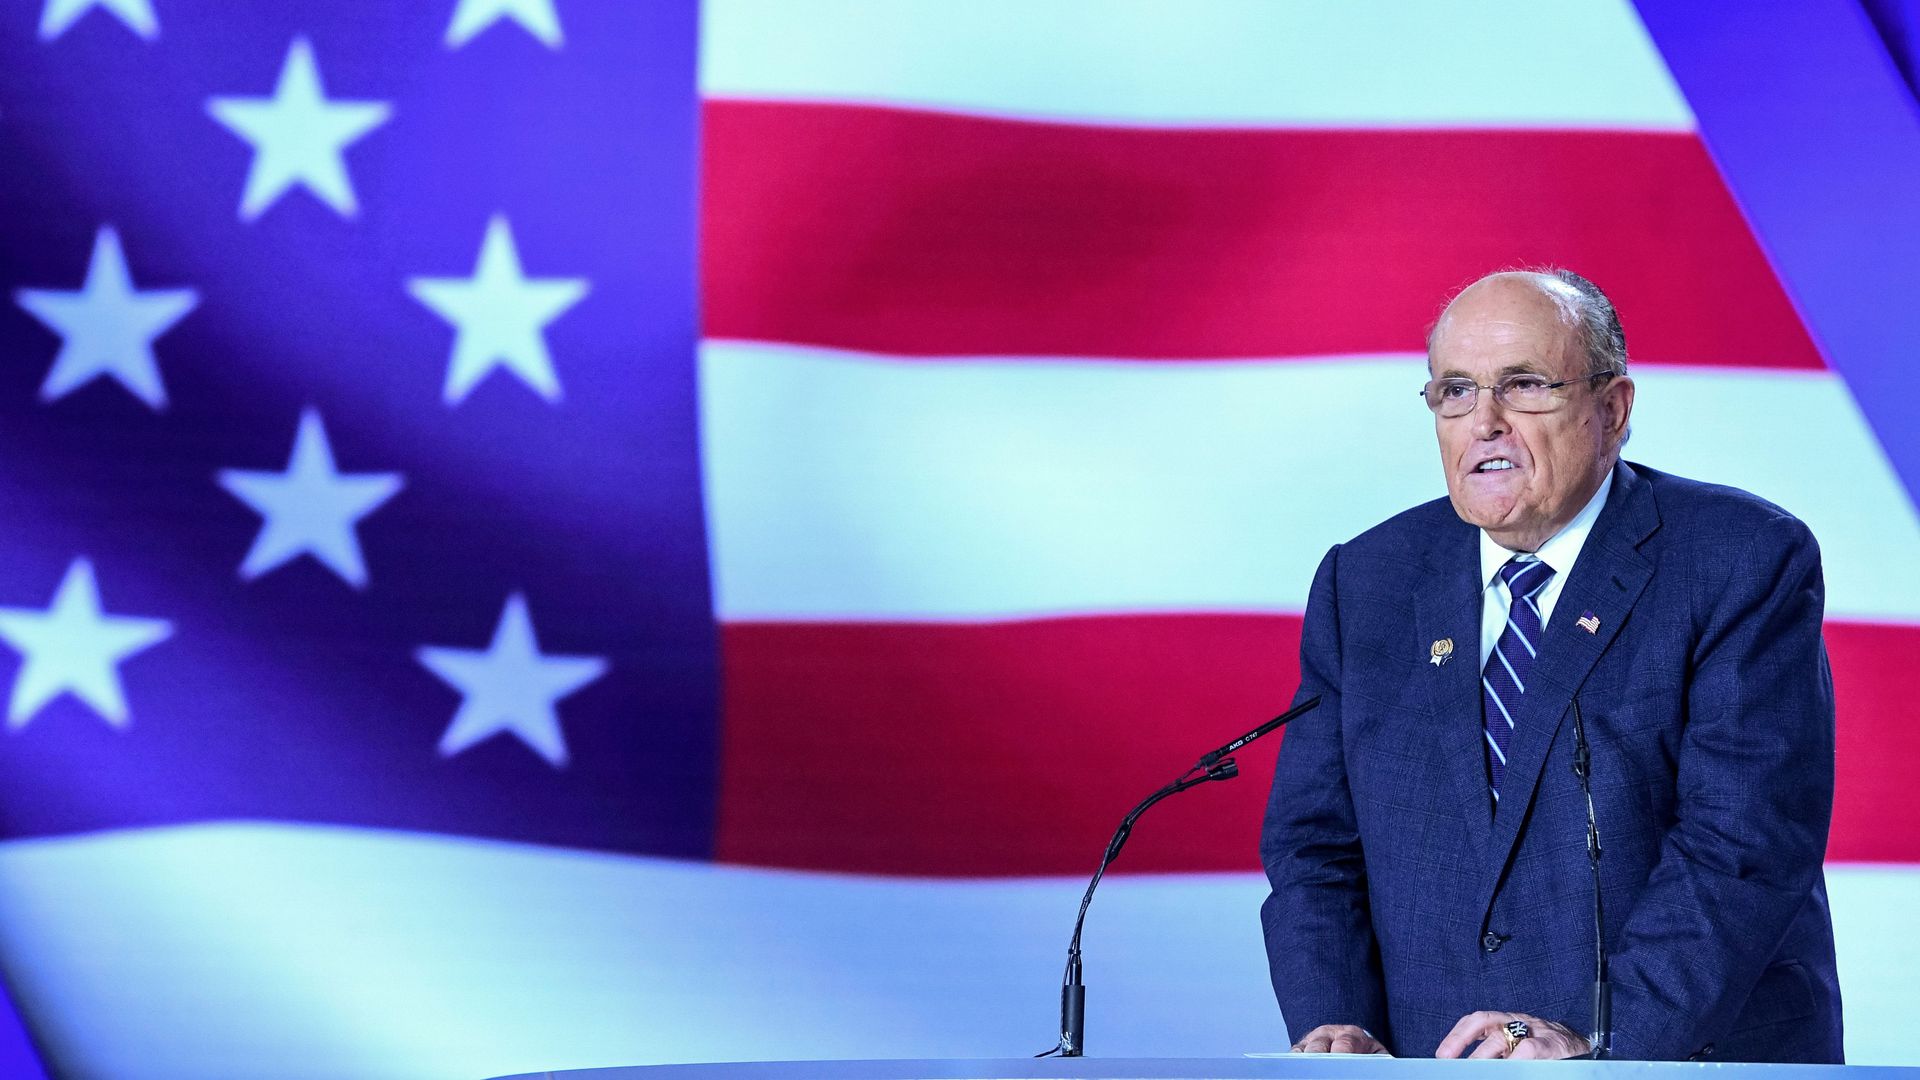 Former Mayor of New York City Rudy Giuliani at a conference at Ashraf-3 camp, which is a base for the People's Mojahedin Organization of Iran (MEK) in Albania on July 13